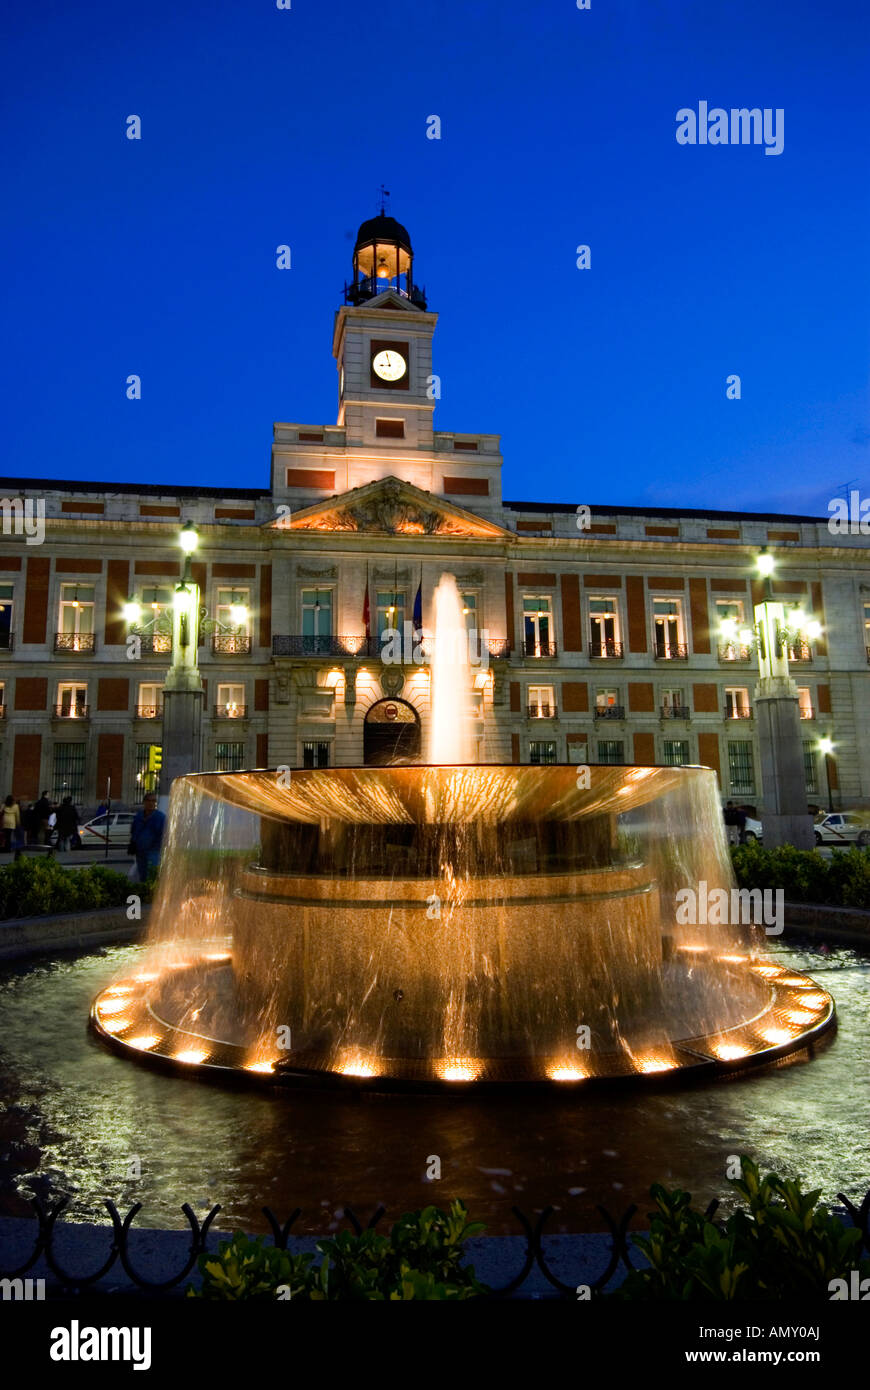 Fountain in front of building lit up at night, Puerta Del Sol, Madrid, Spain Stock Photo